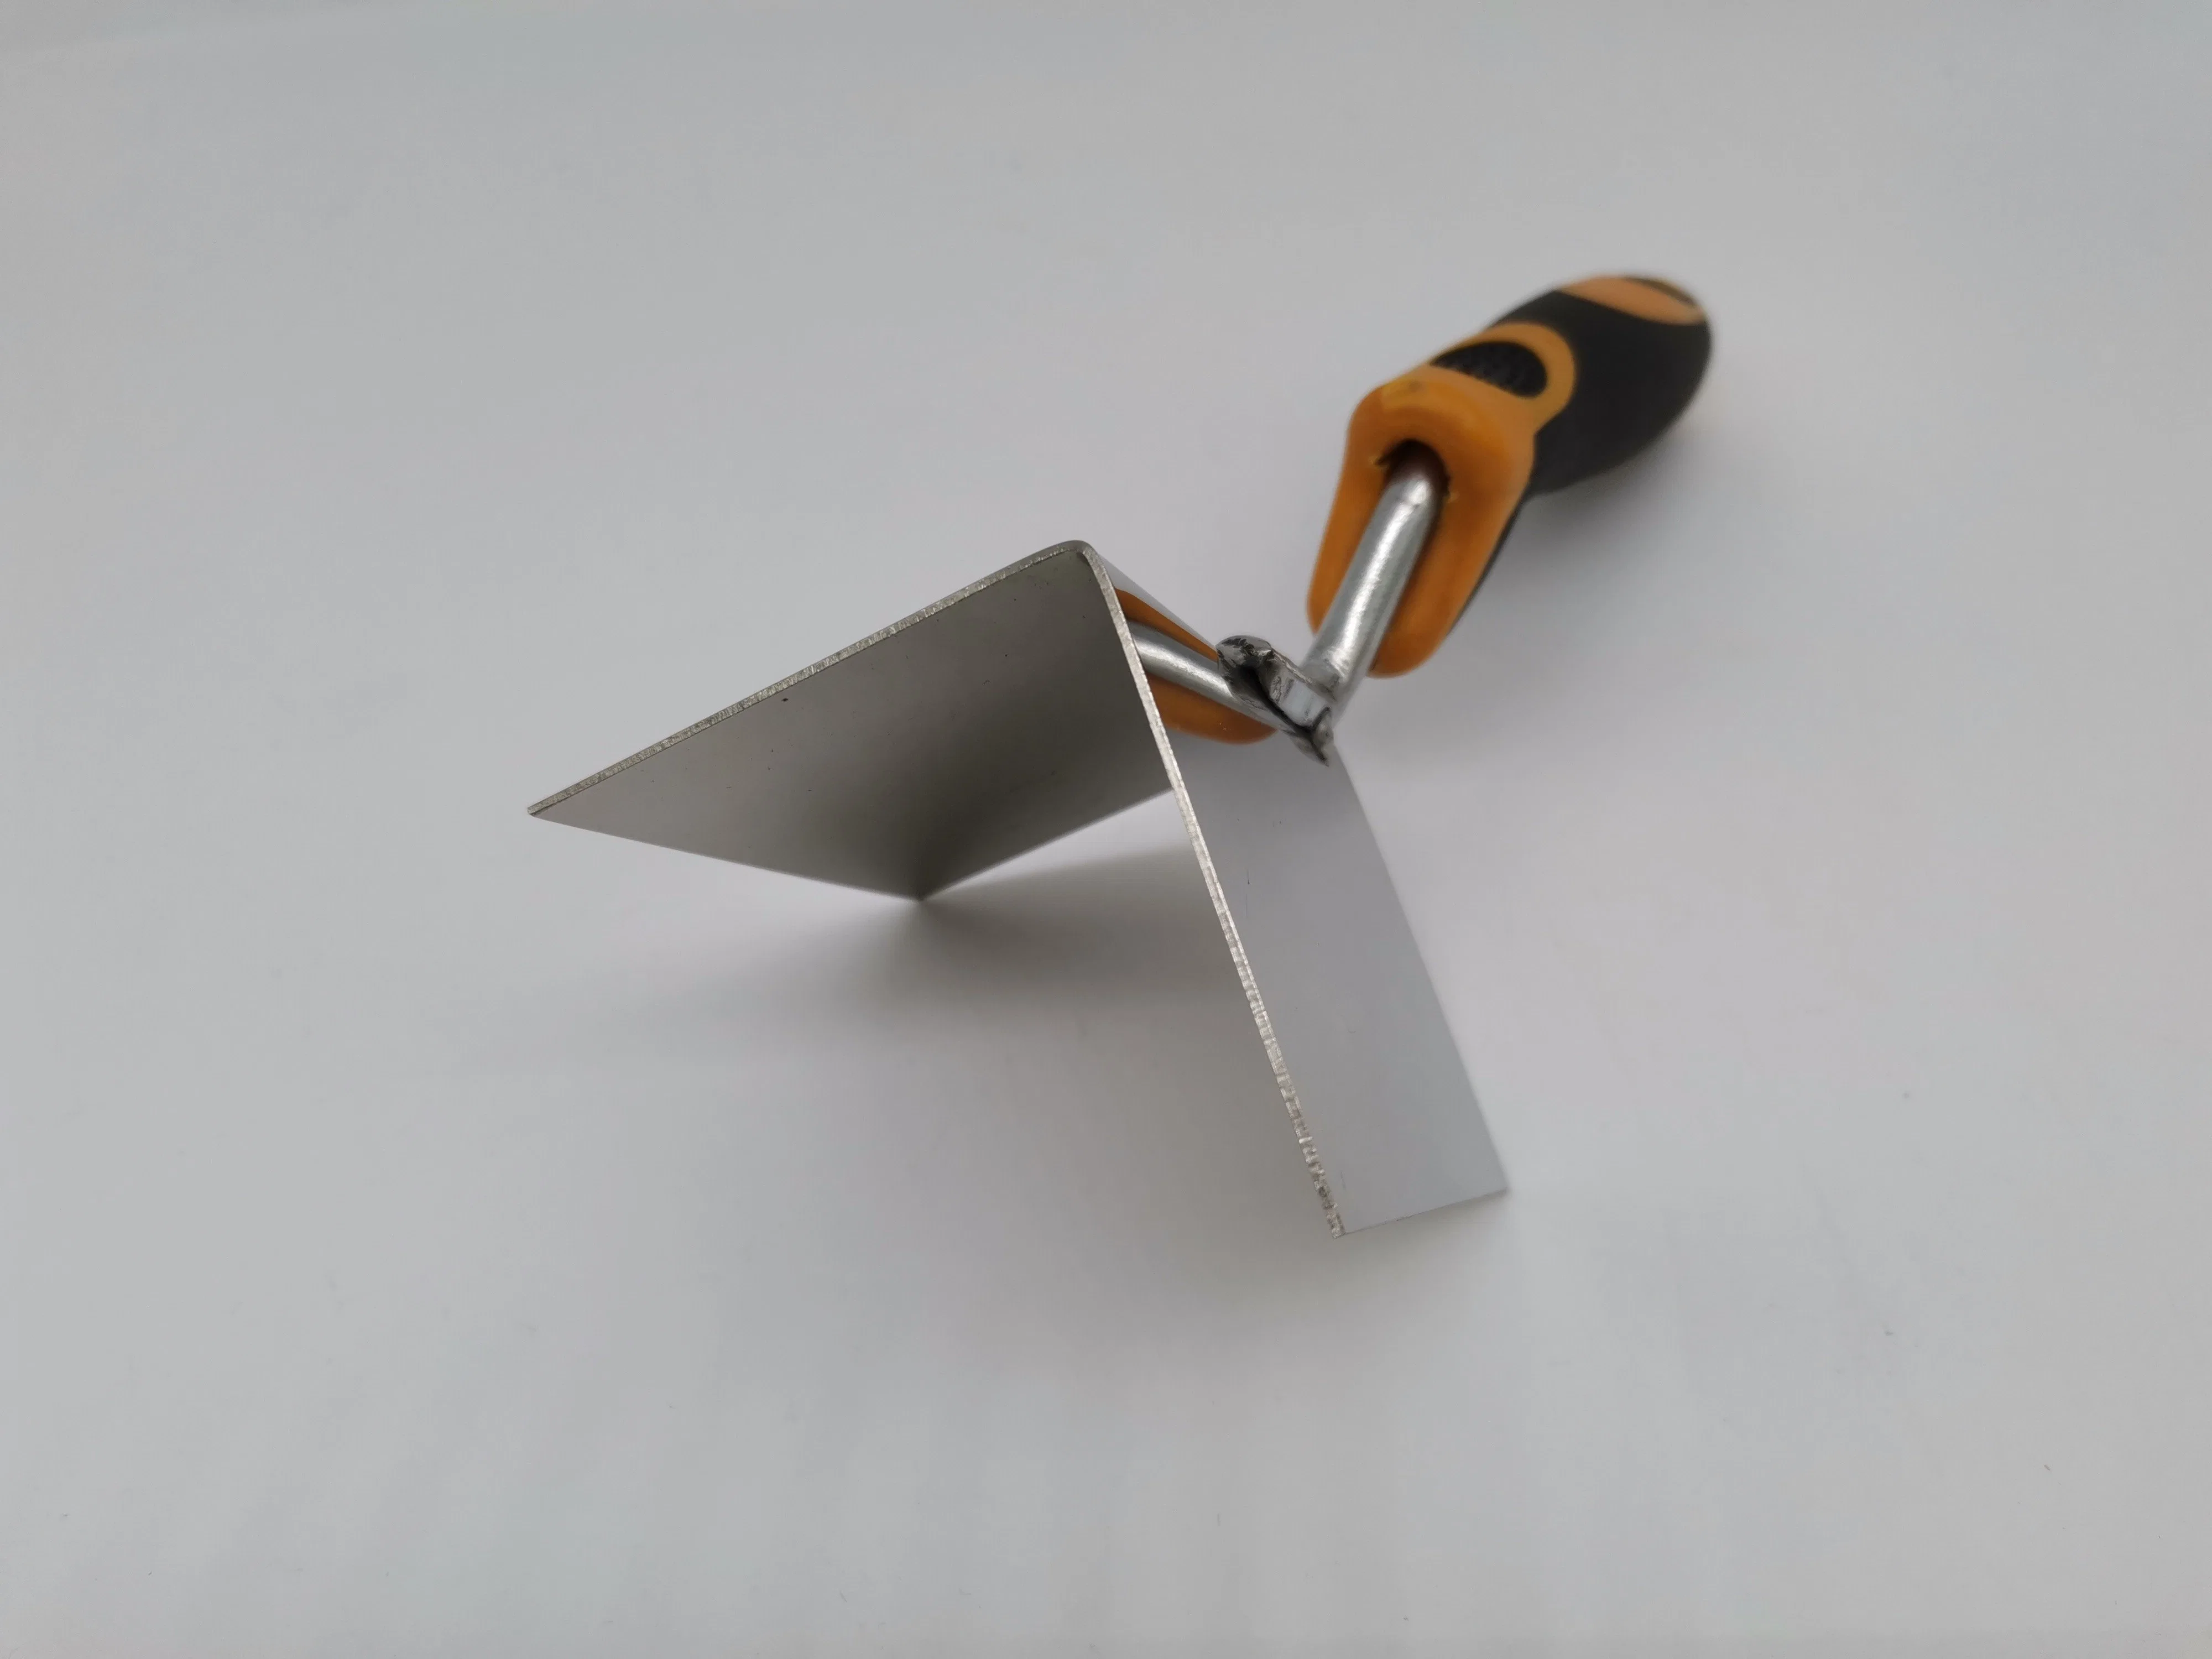 Outer Corner The Best Selling Bricklaying Trowel in Construction Tools Stainless Steel Bricklaying Trowel for Corner